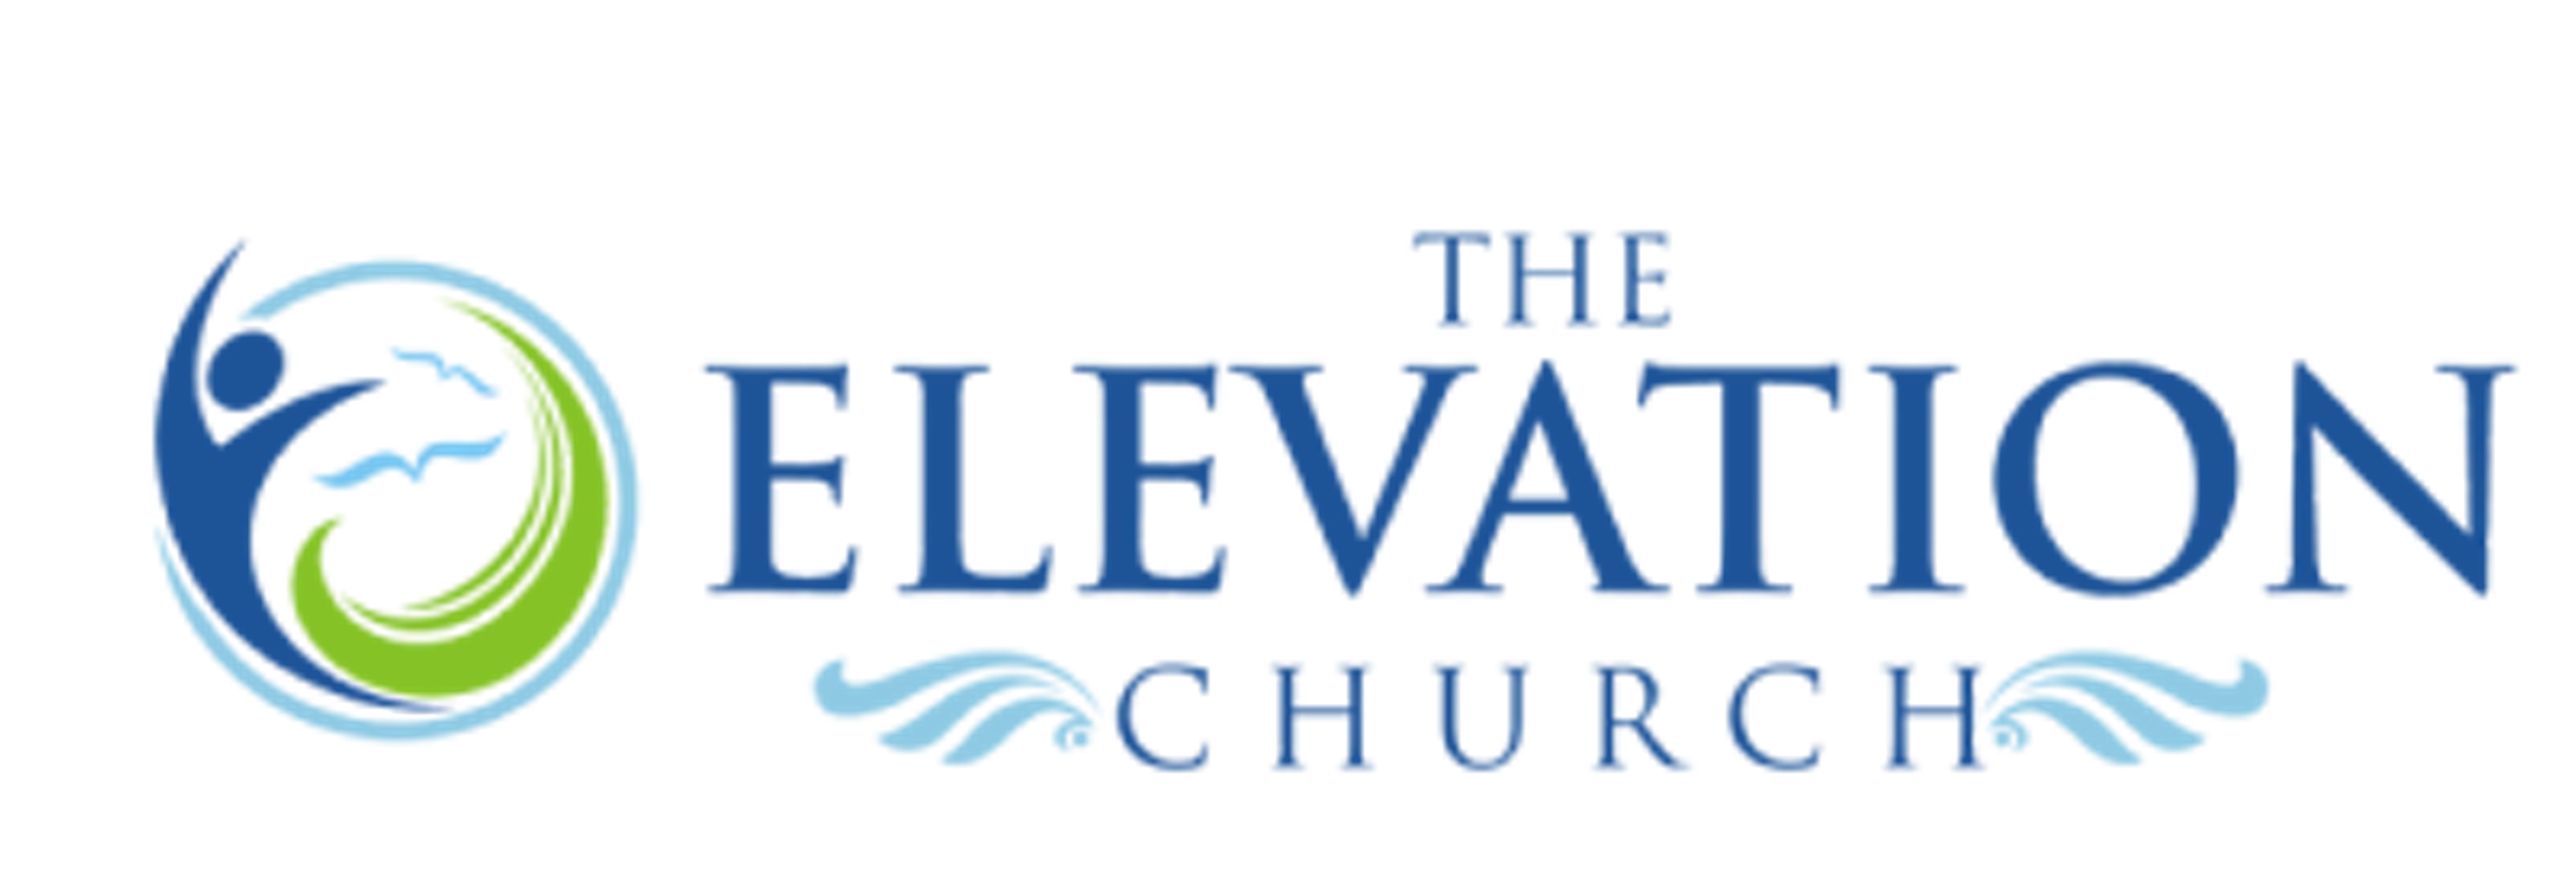 Eleveation-Church-logo.png